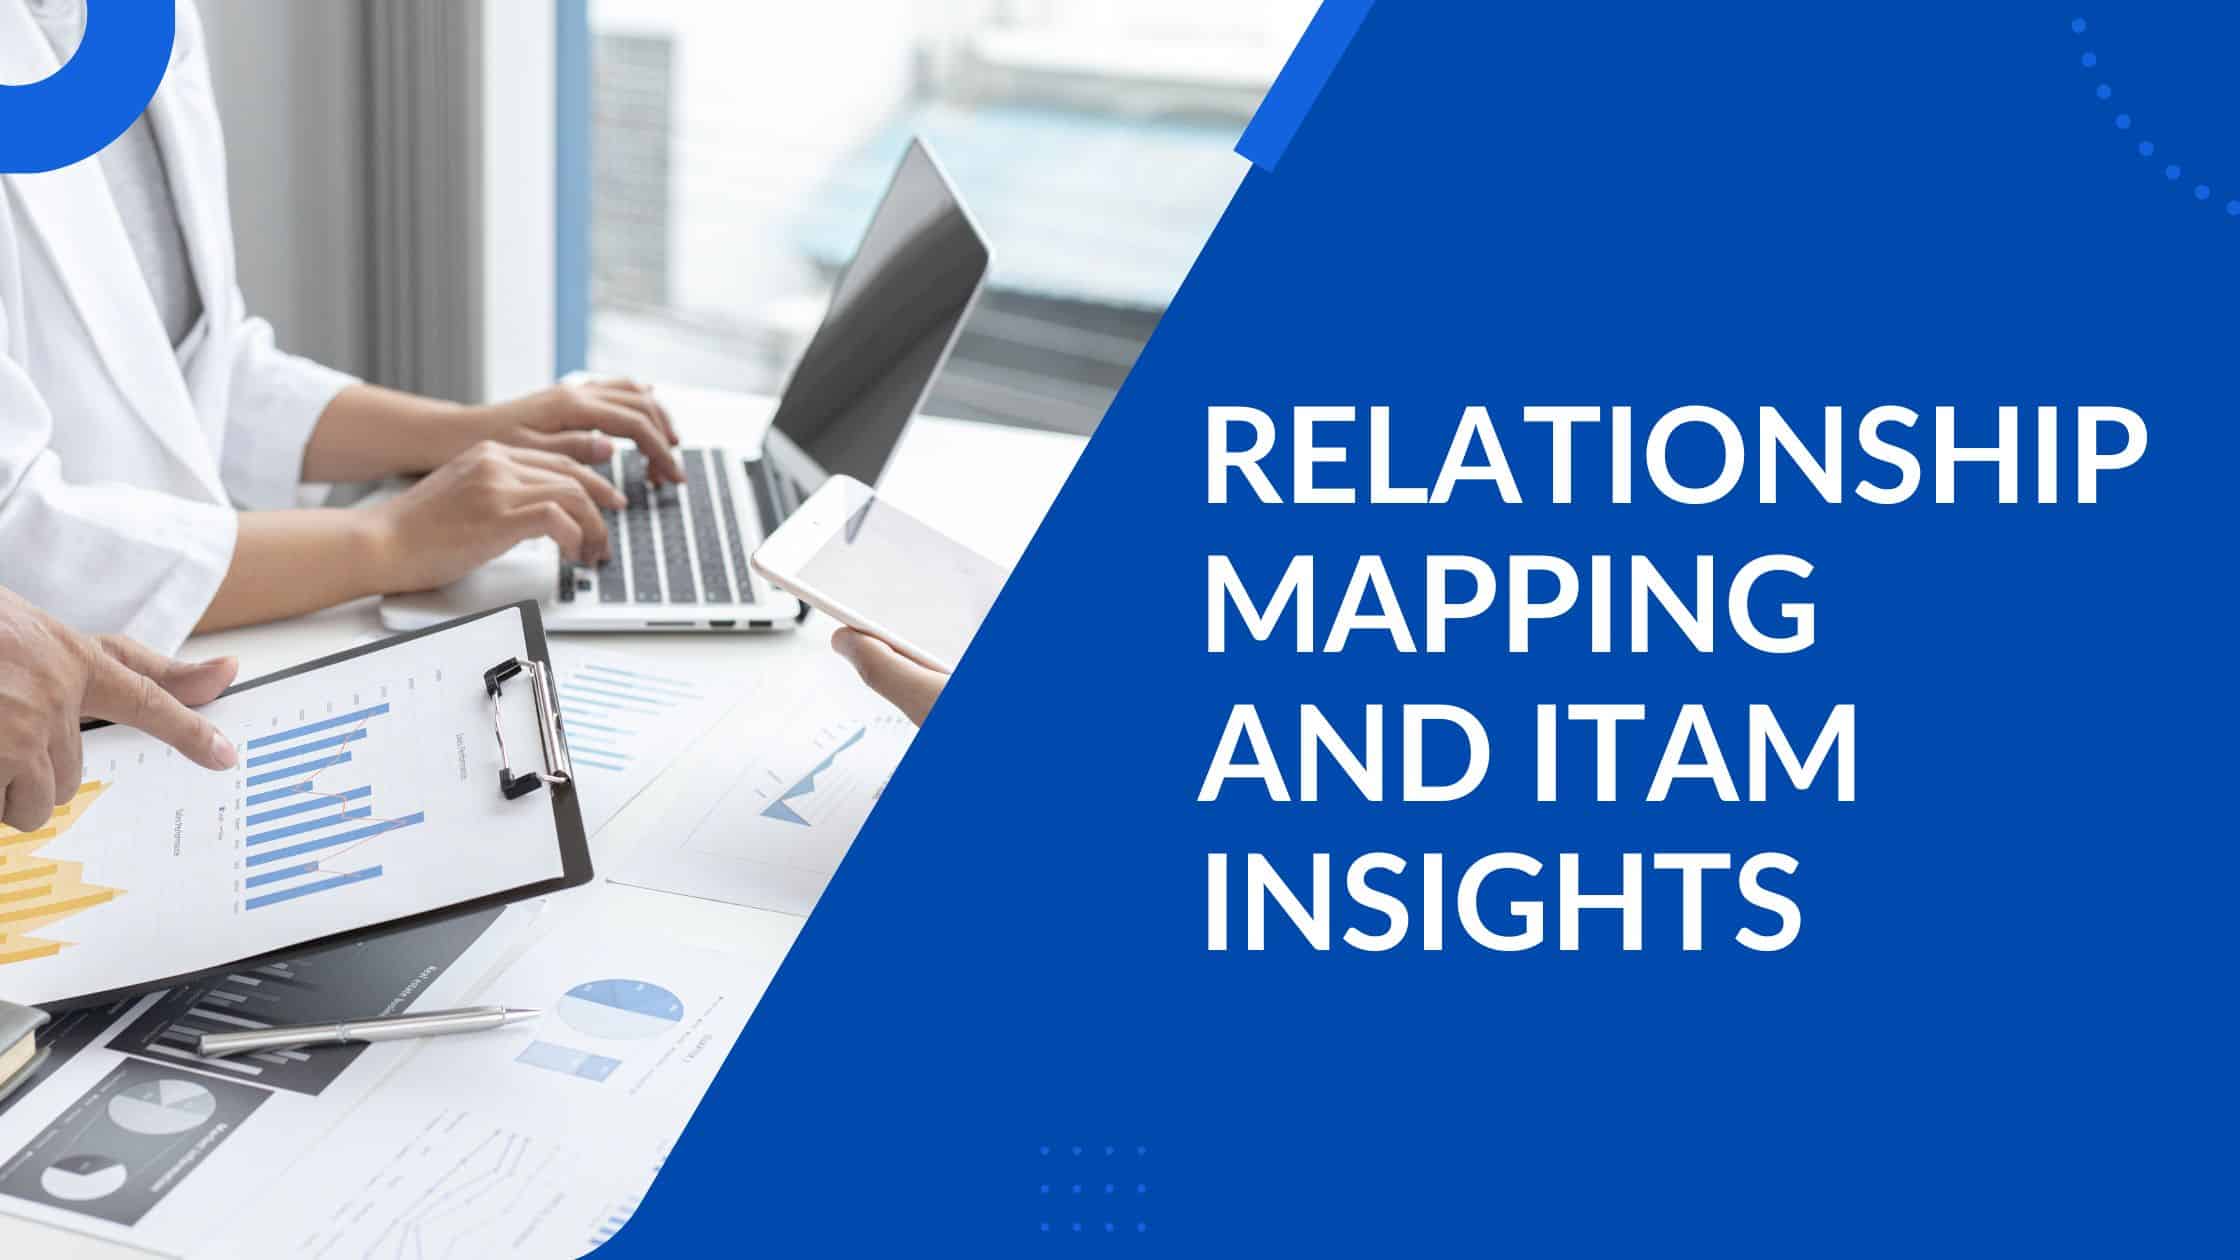 RELATIONSHIP MAPPING AND ITAM INSIGHTS